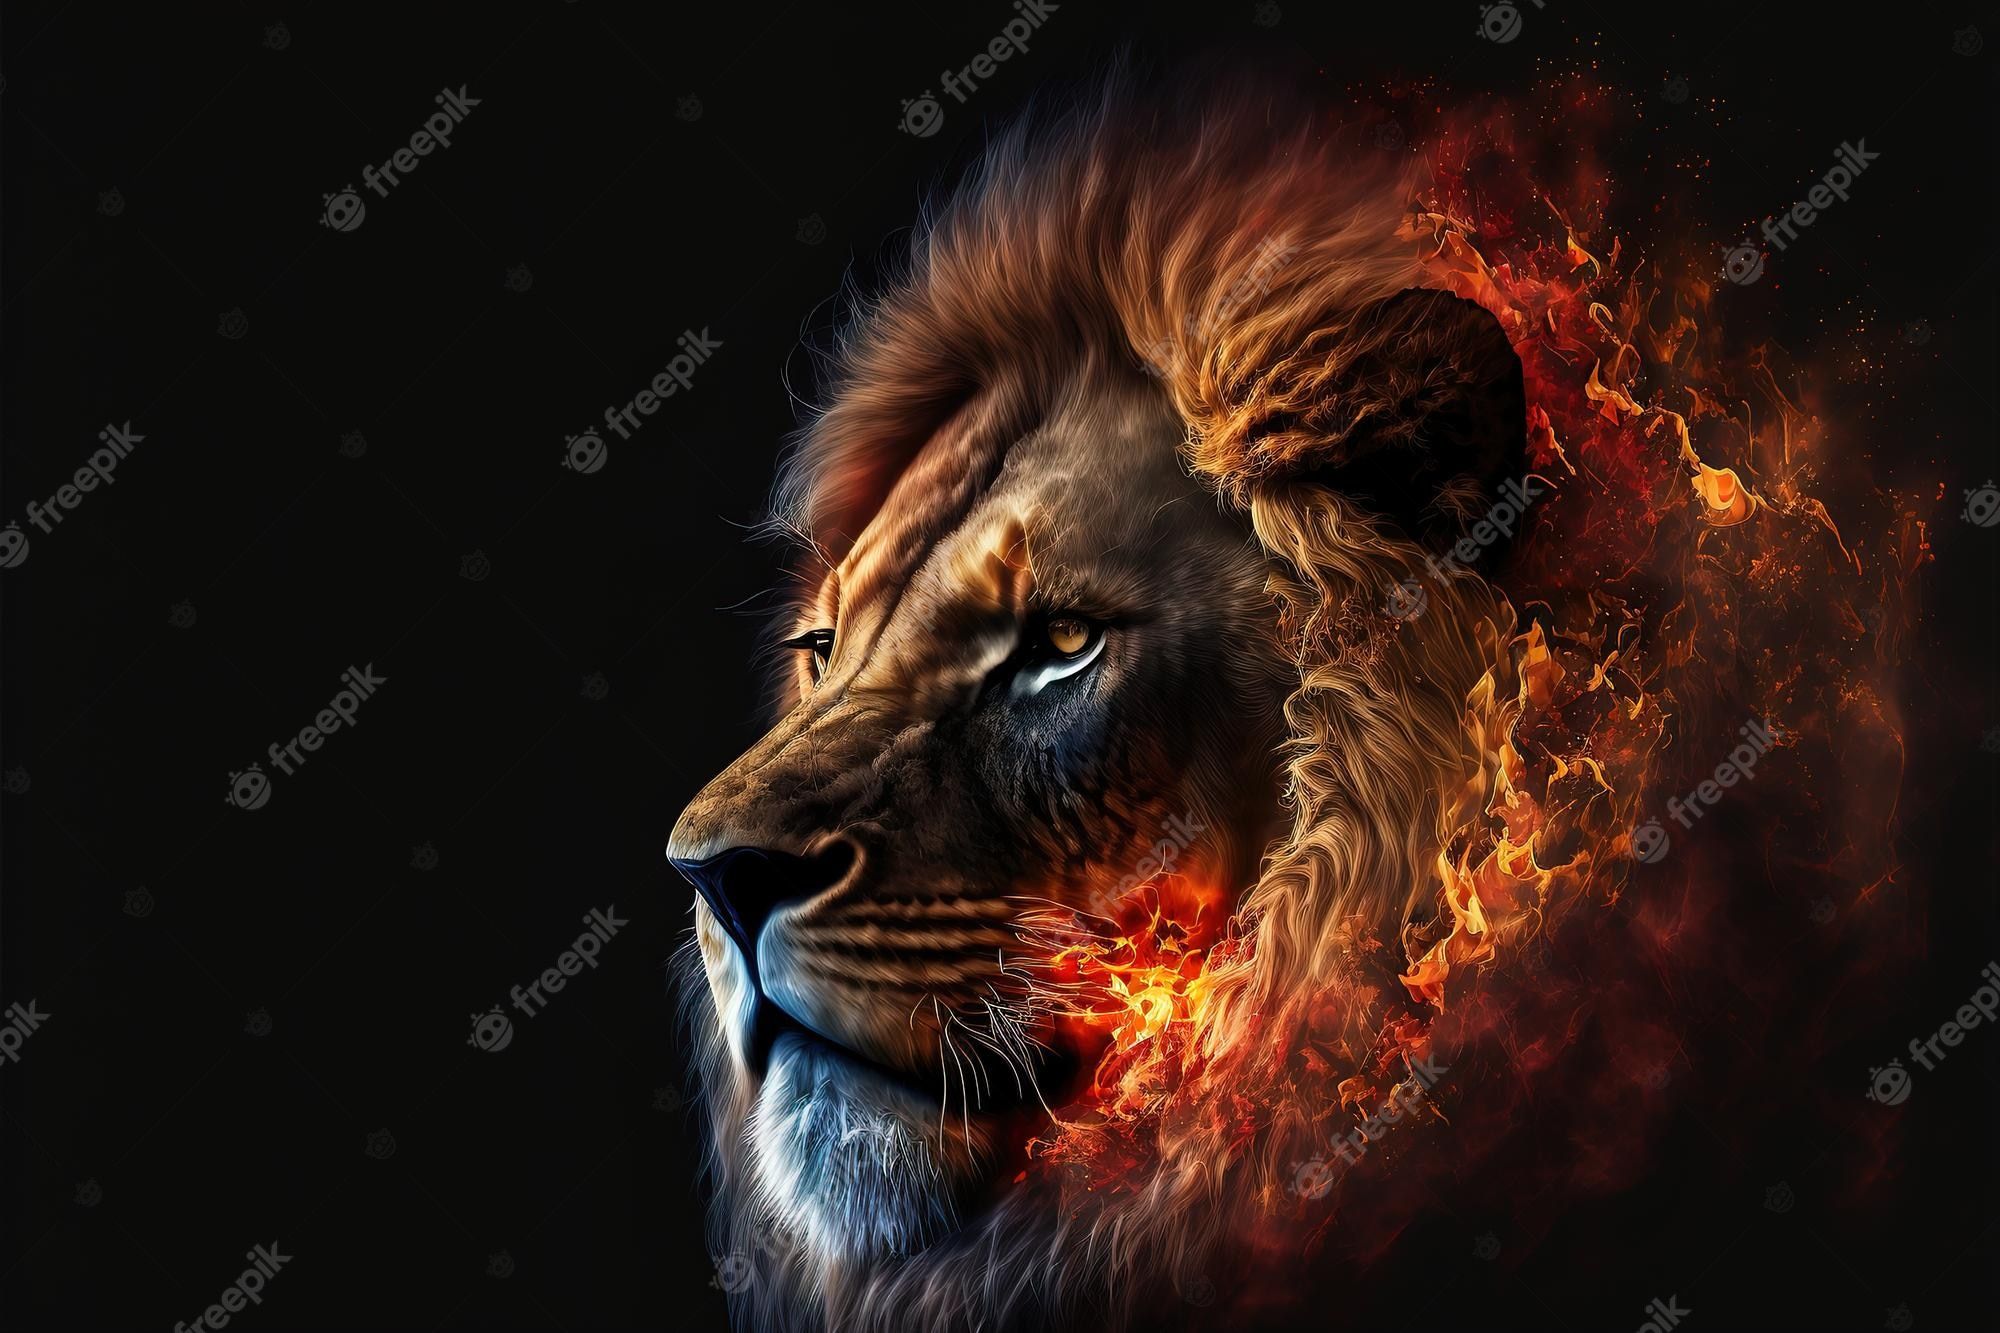 A lion with fire in its eyes - Lion